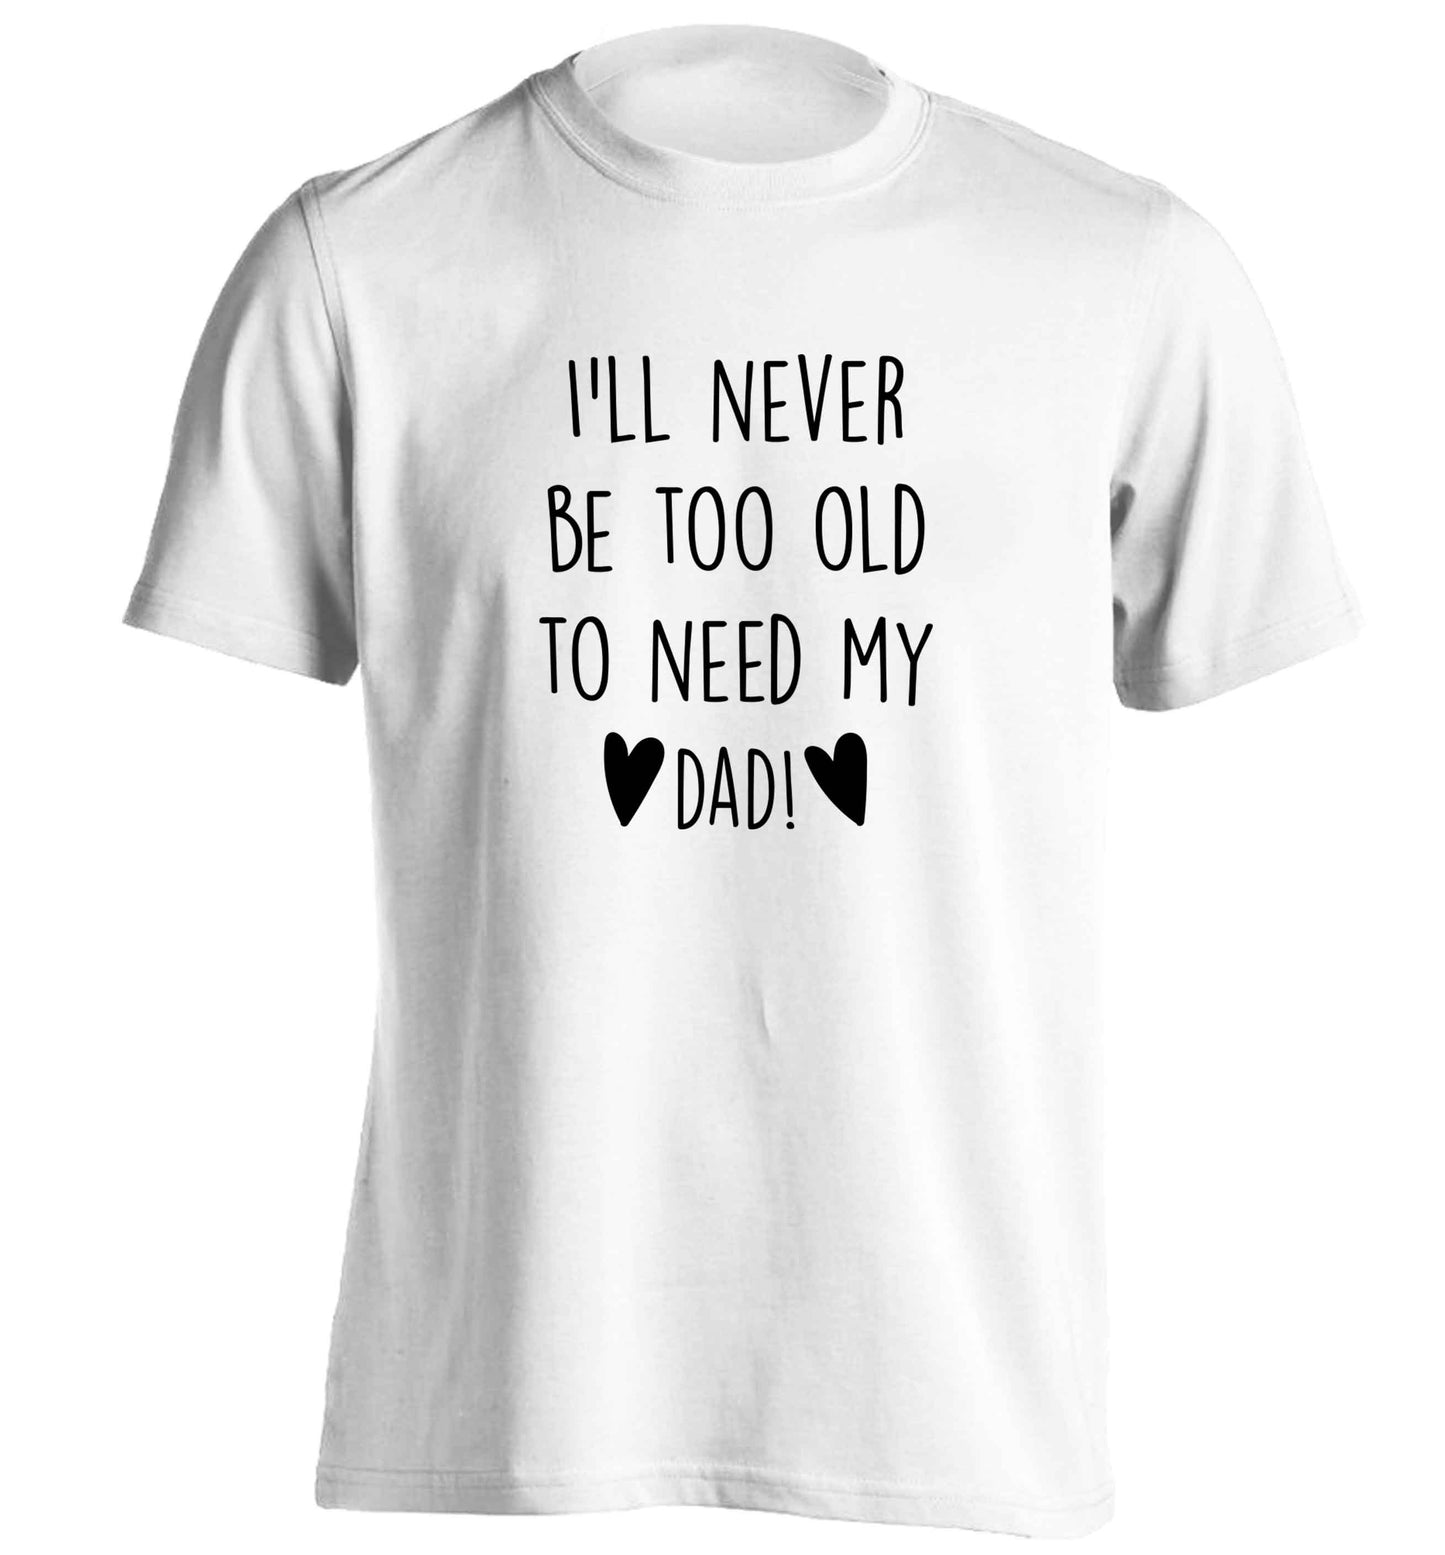 I'll never be too old to need my dad adults unisex white Tshirt 2XL